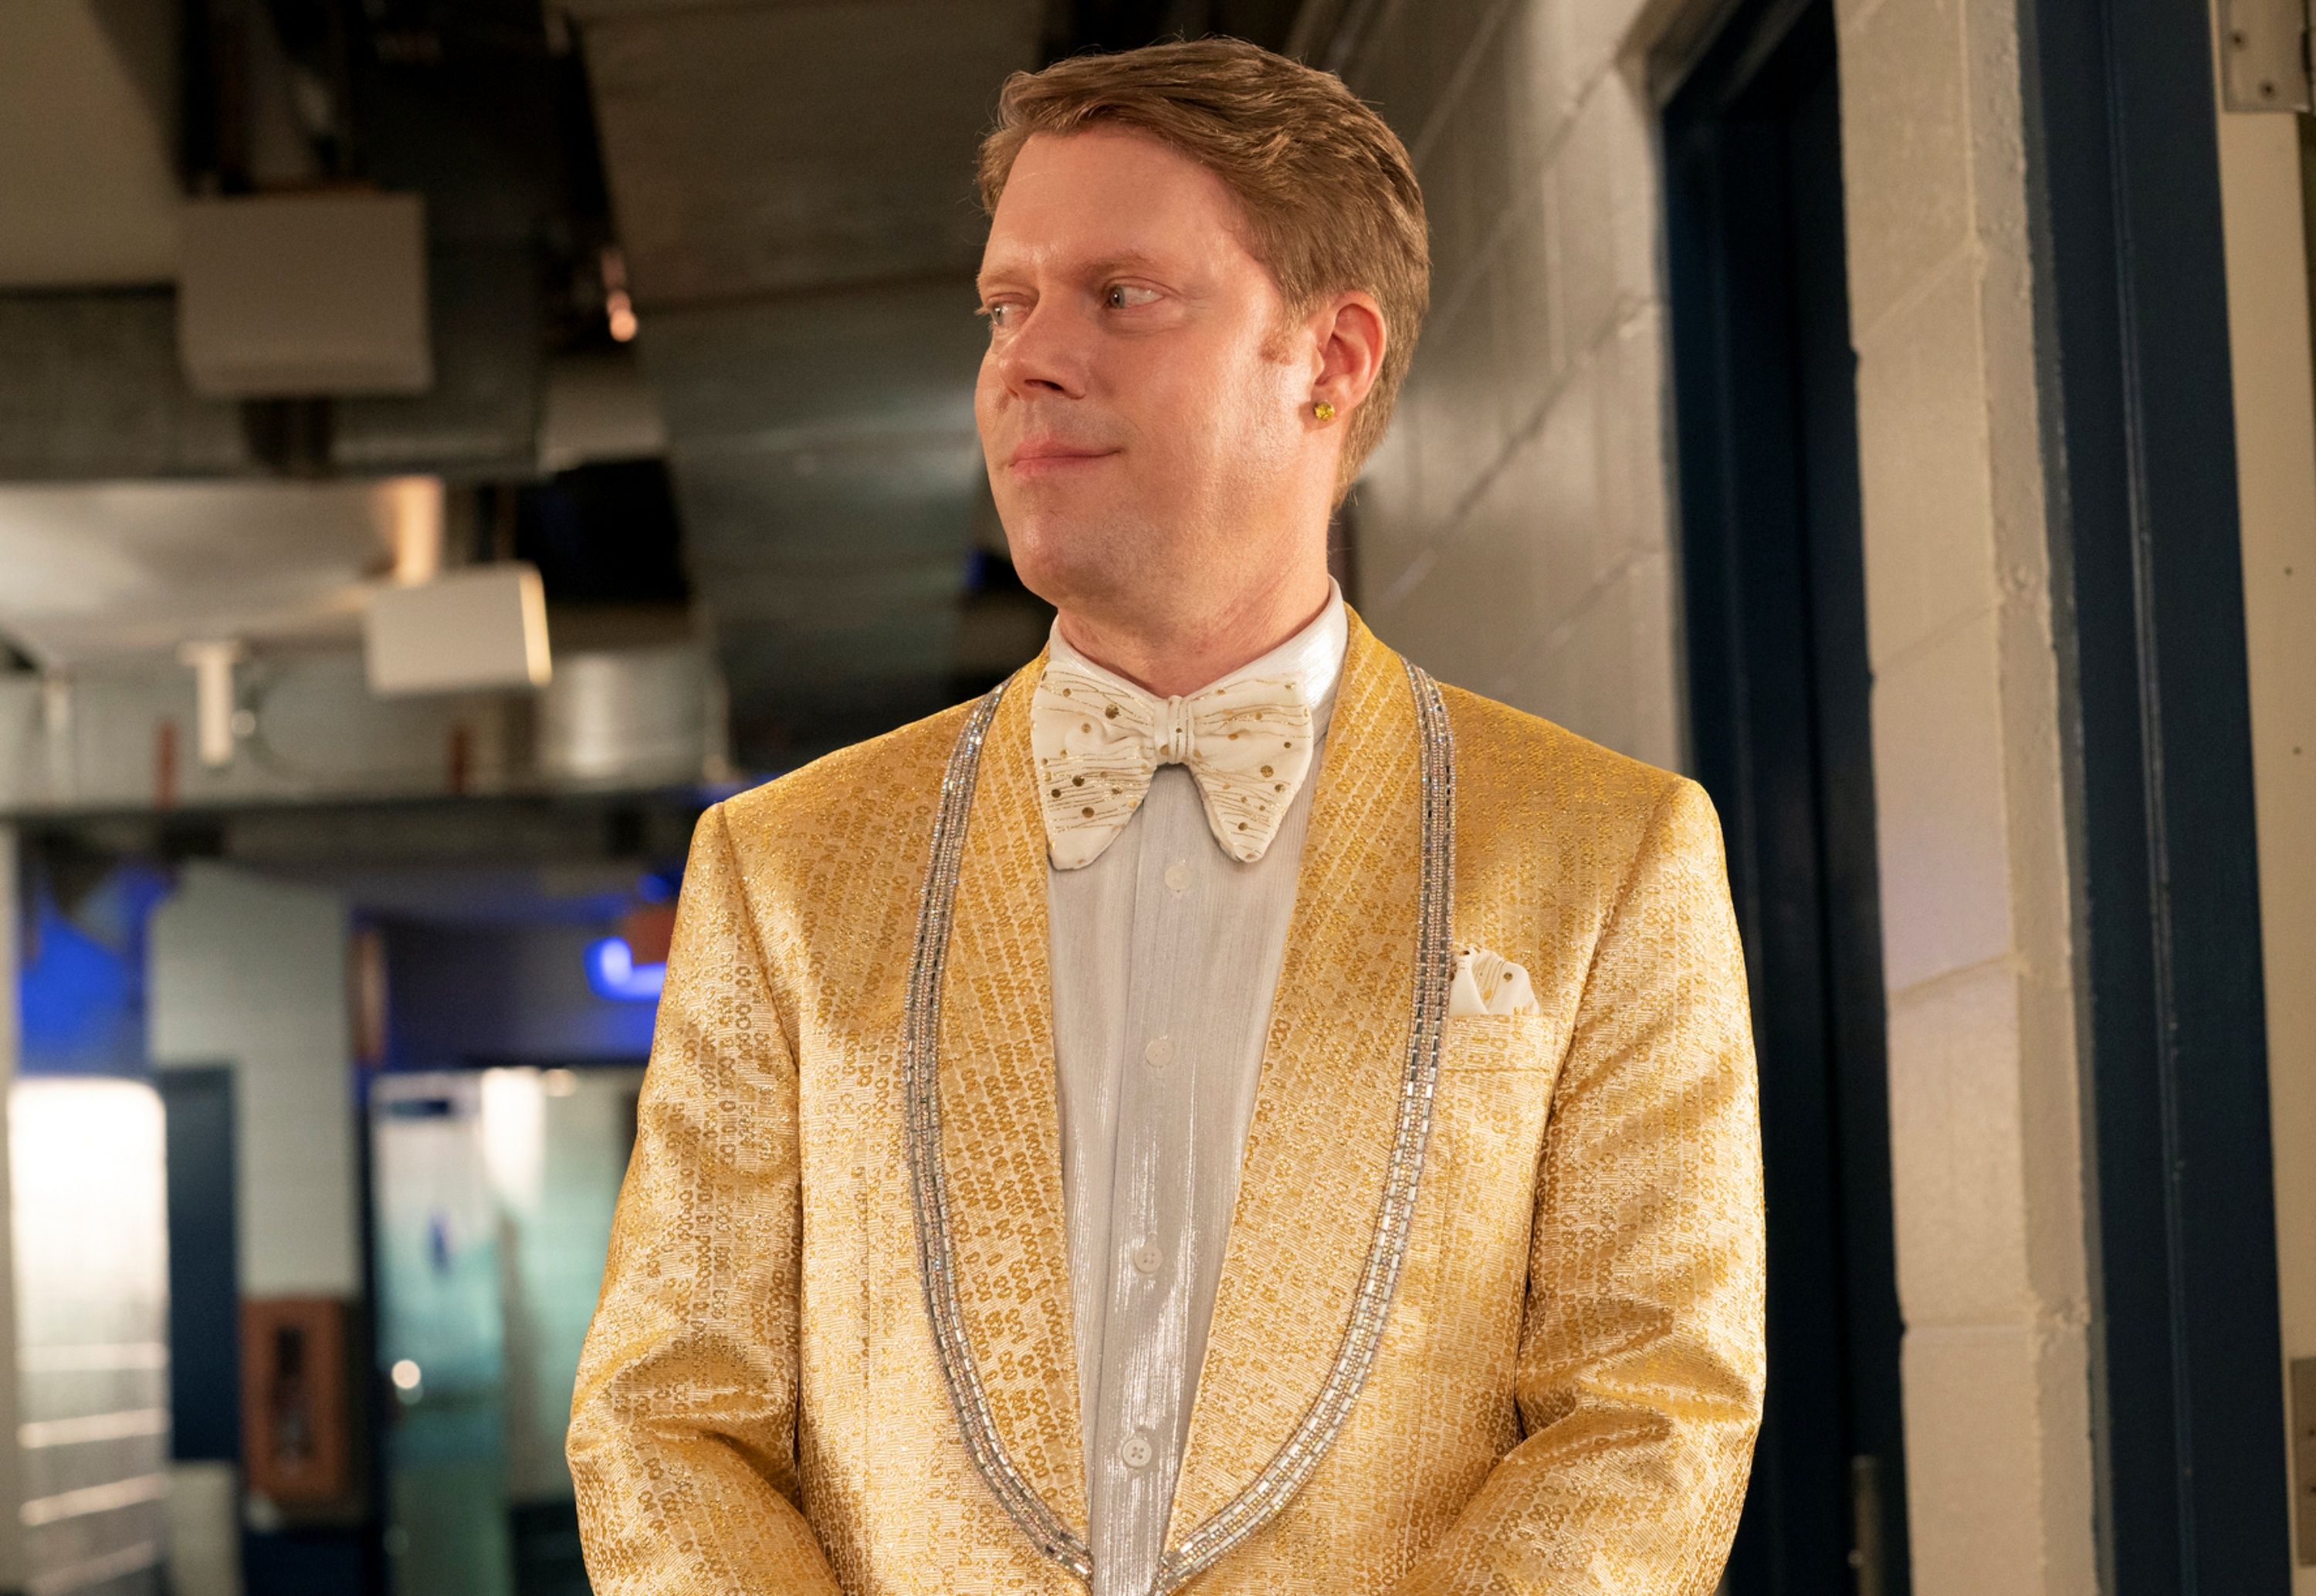 Tim Baltz as BJ, the husband of Judy Gemstone, in Season 3 of The Righteous Gemstones